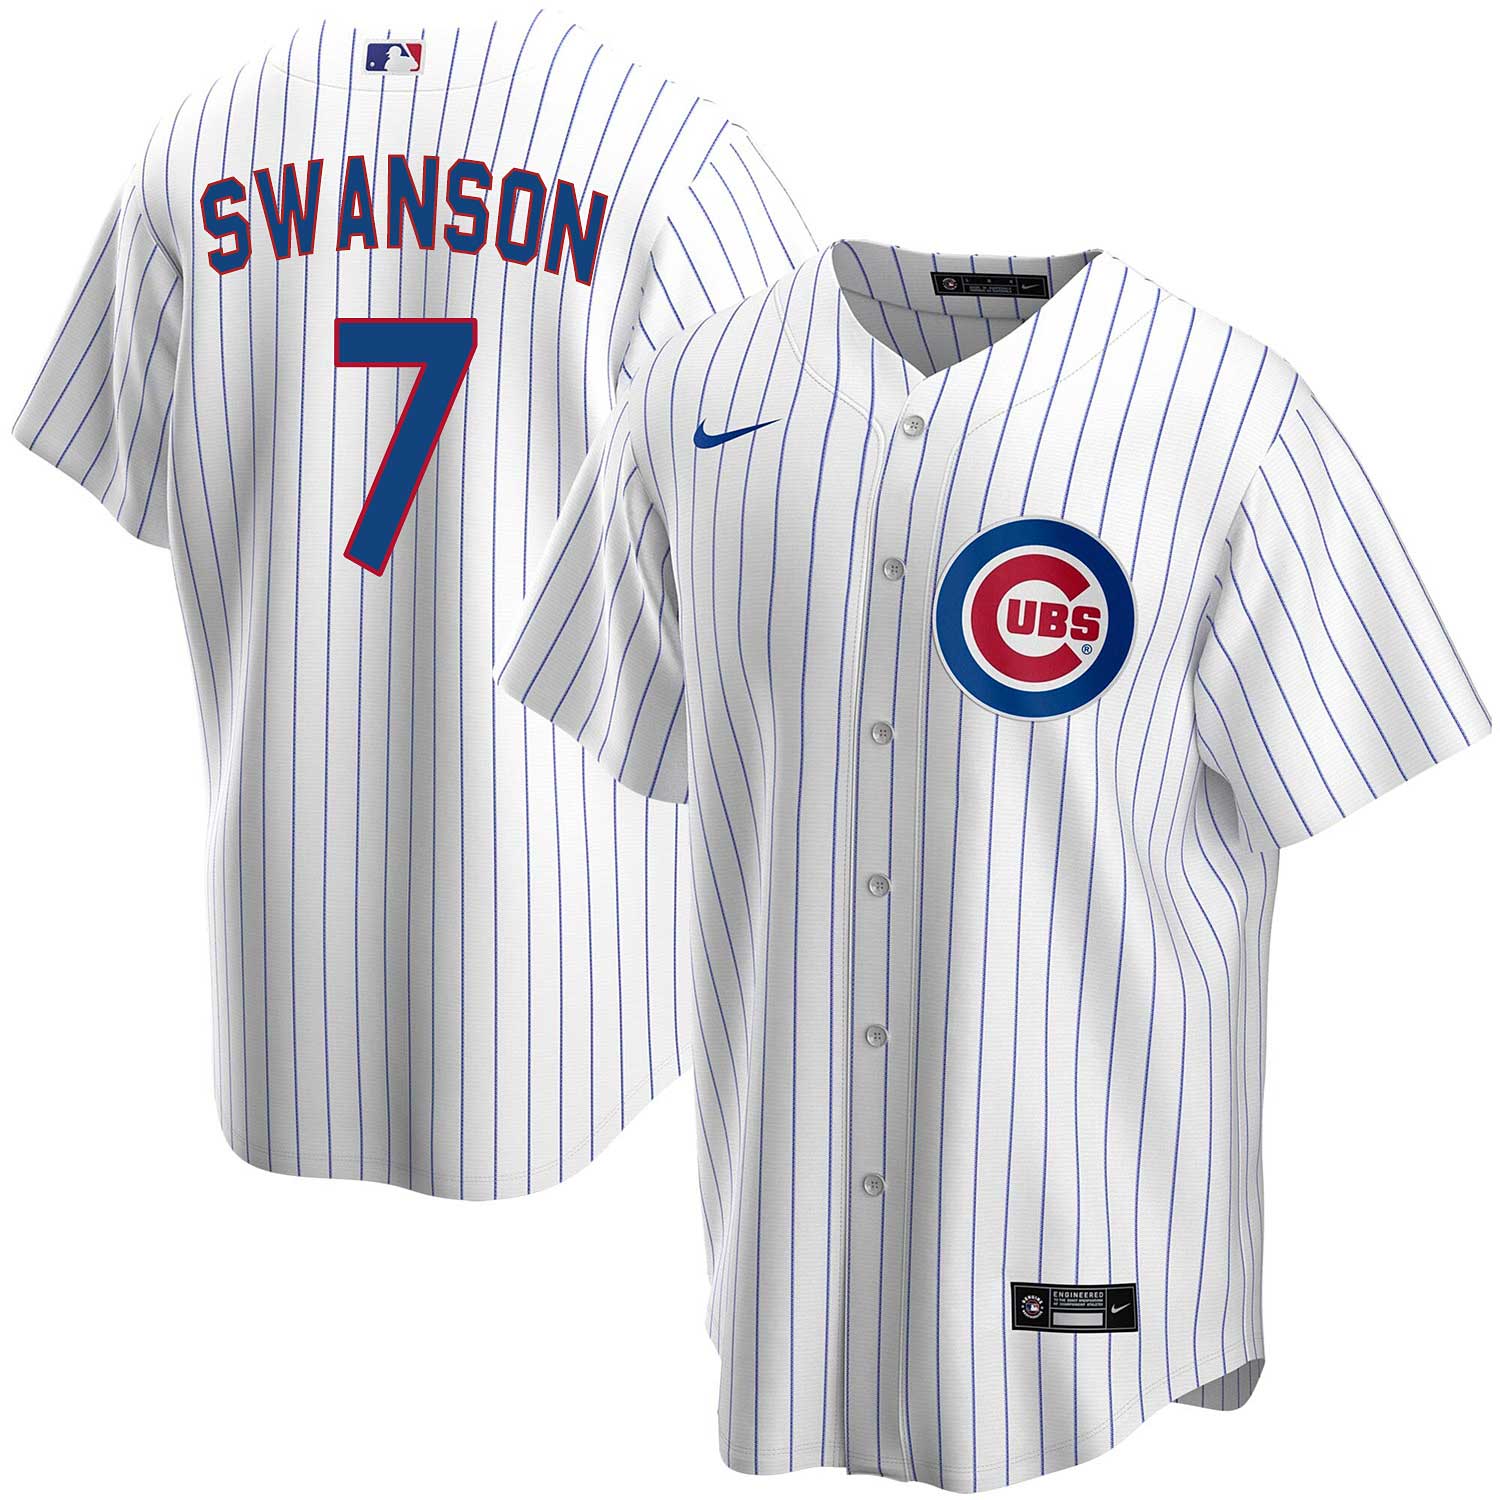 Nike Women's Dansby Swanson Royal Chicago Cubs Name and Number T